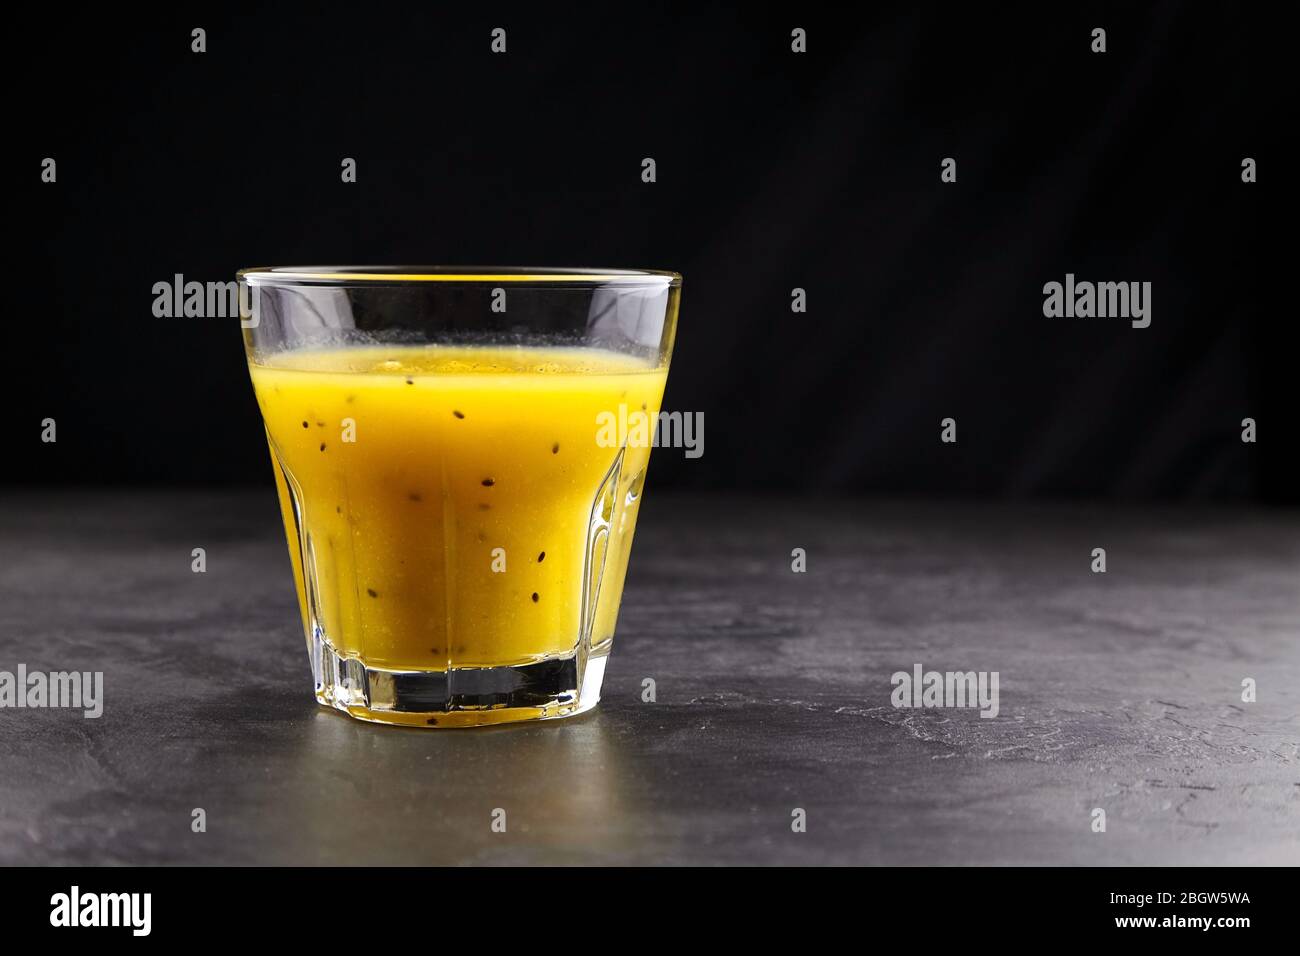 Kiwi gold fruit juice in transparent glass on stone table on black background with copy space. Fresh yellow kiwi smoothie. Healthy drink Stock Photo